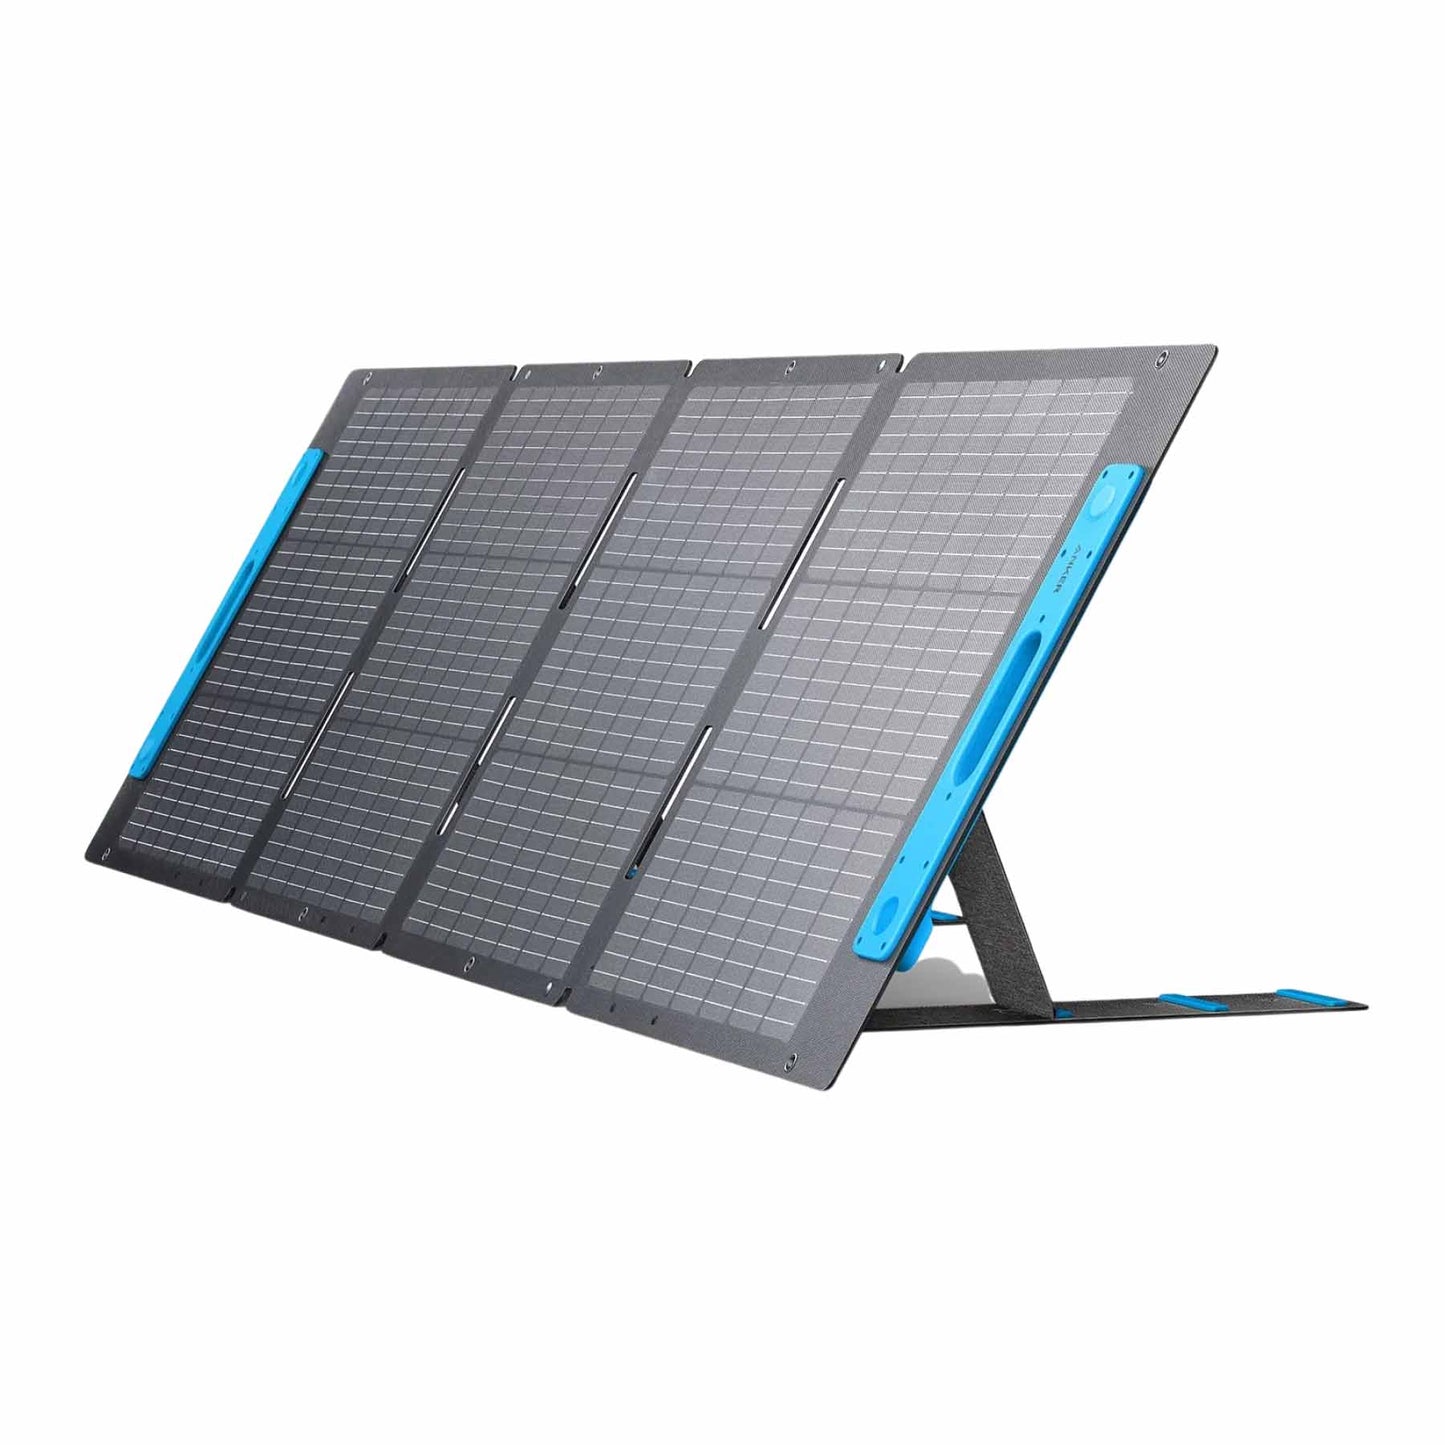 Anker Solar Generator 767 | PowerHouse 2048Wh with 200W Solar Panel and Expansion Battery